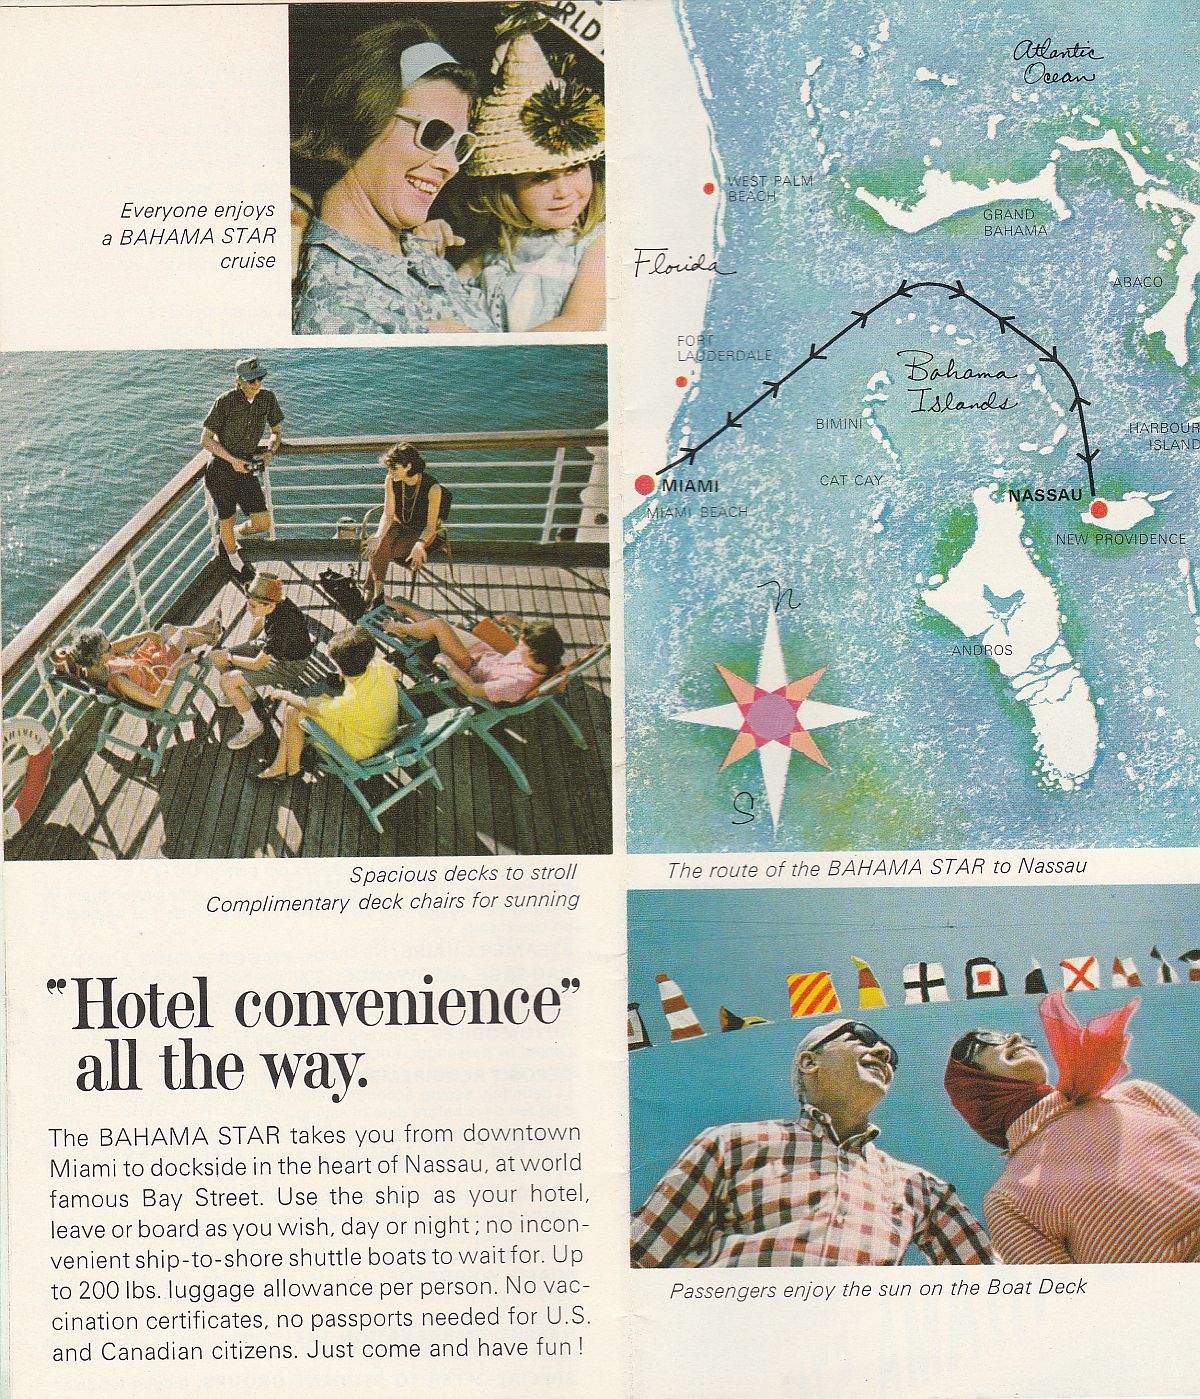 ss Bahama Star Ship&apo;s route to Nassau: Cruising to Nassau with "Hotel convenience" all the way.